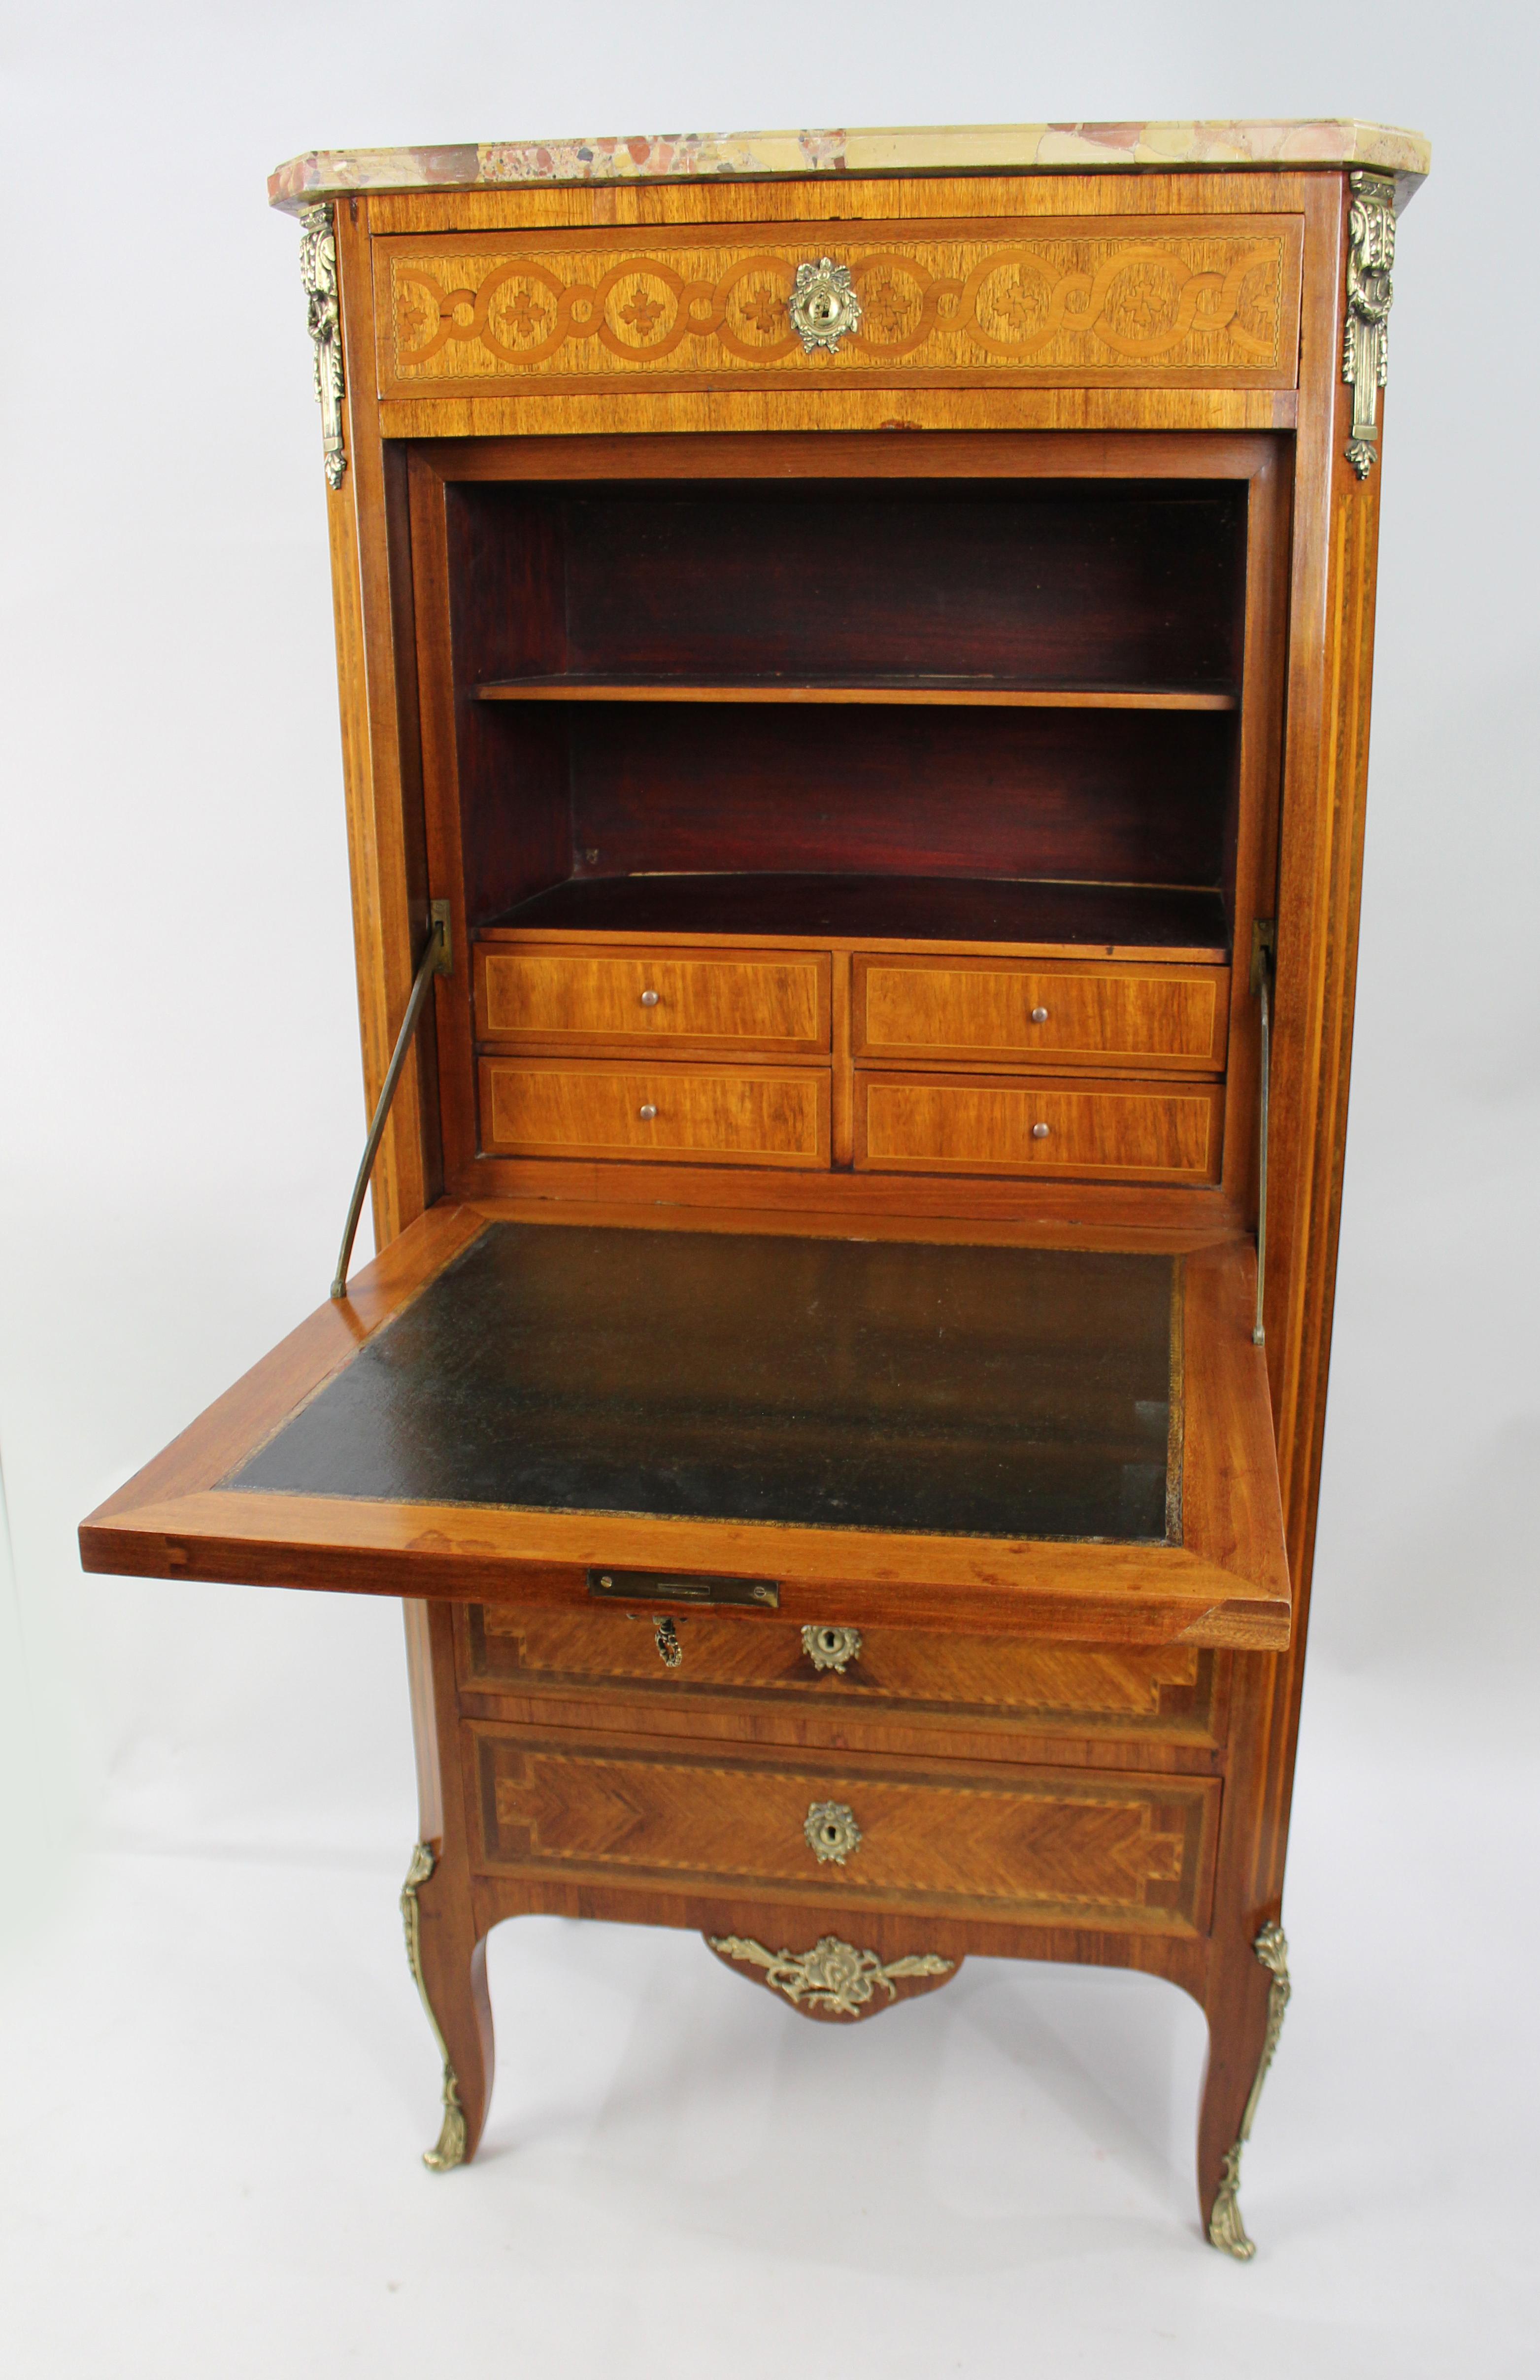 19th c. French Marble Topped Inlaid Escritoire For Sale 3